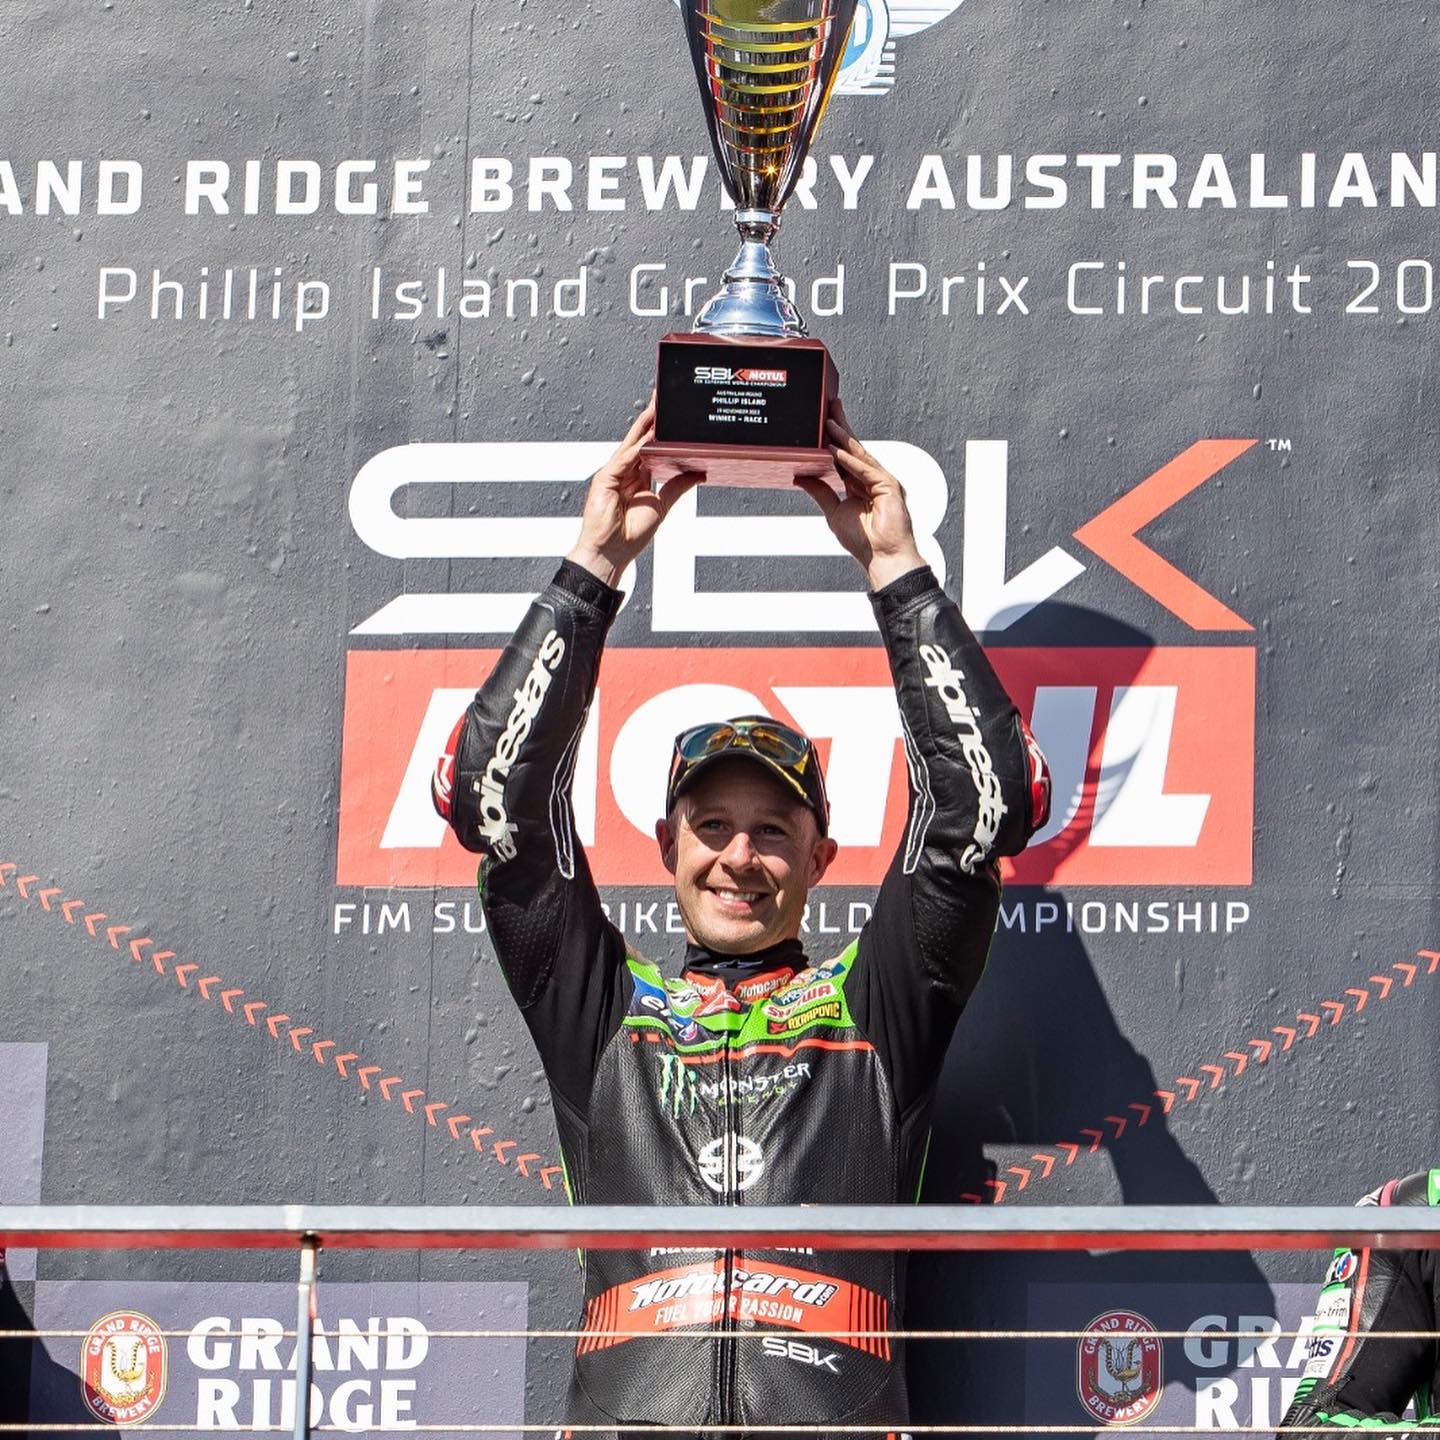 JONATHAN REA ENDS 2022 WORLD SUPERBIKE SEASON ON A HIGH WITH VICTORY IN RACE ONE AND A SWEEP OF PODIUM FINISHES THROUGHOUT THE WEEKEND AT PHILLIP ISLAND